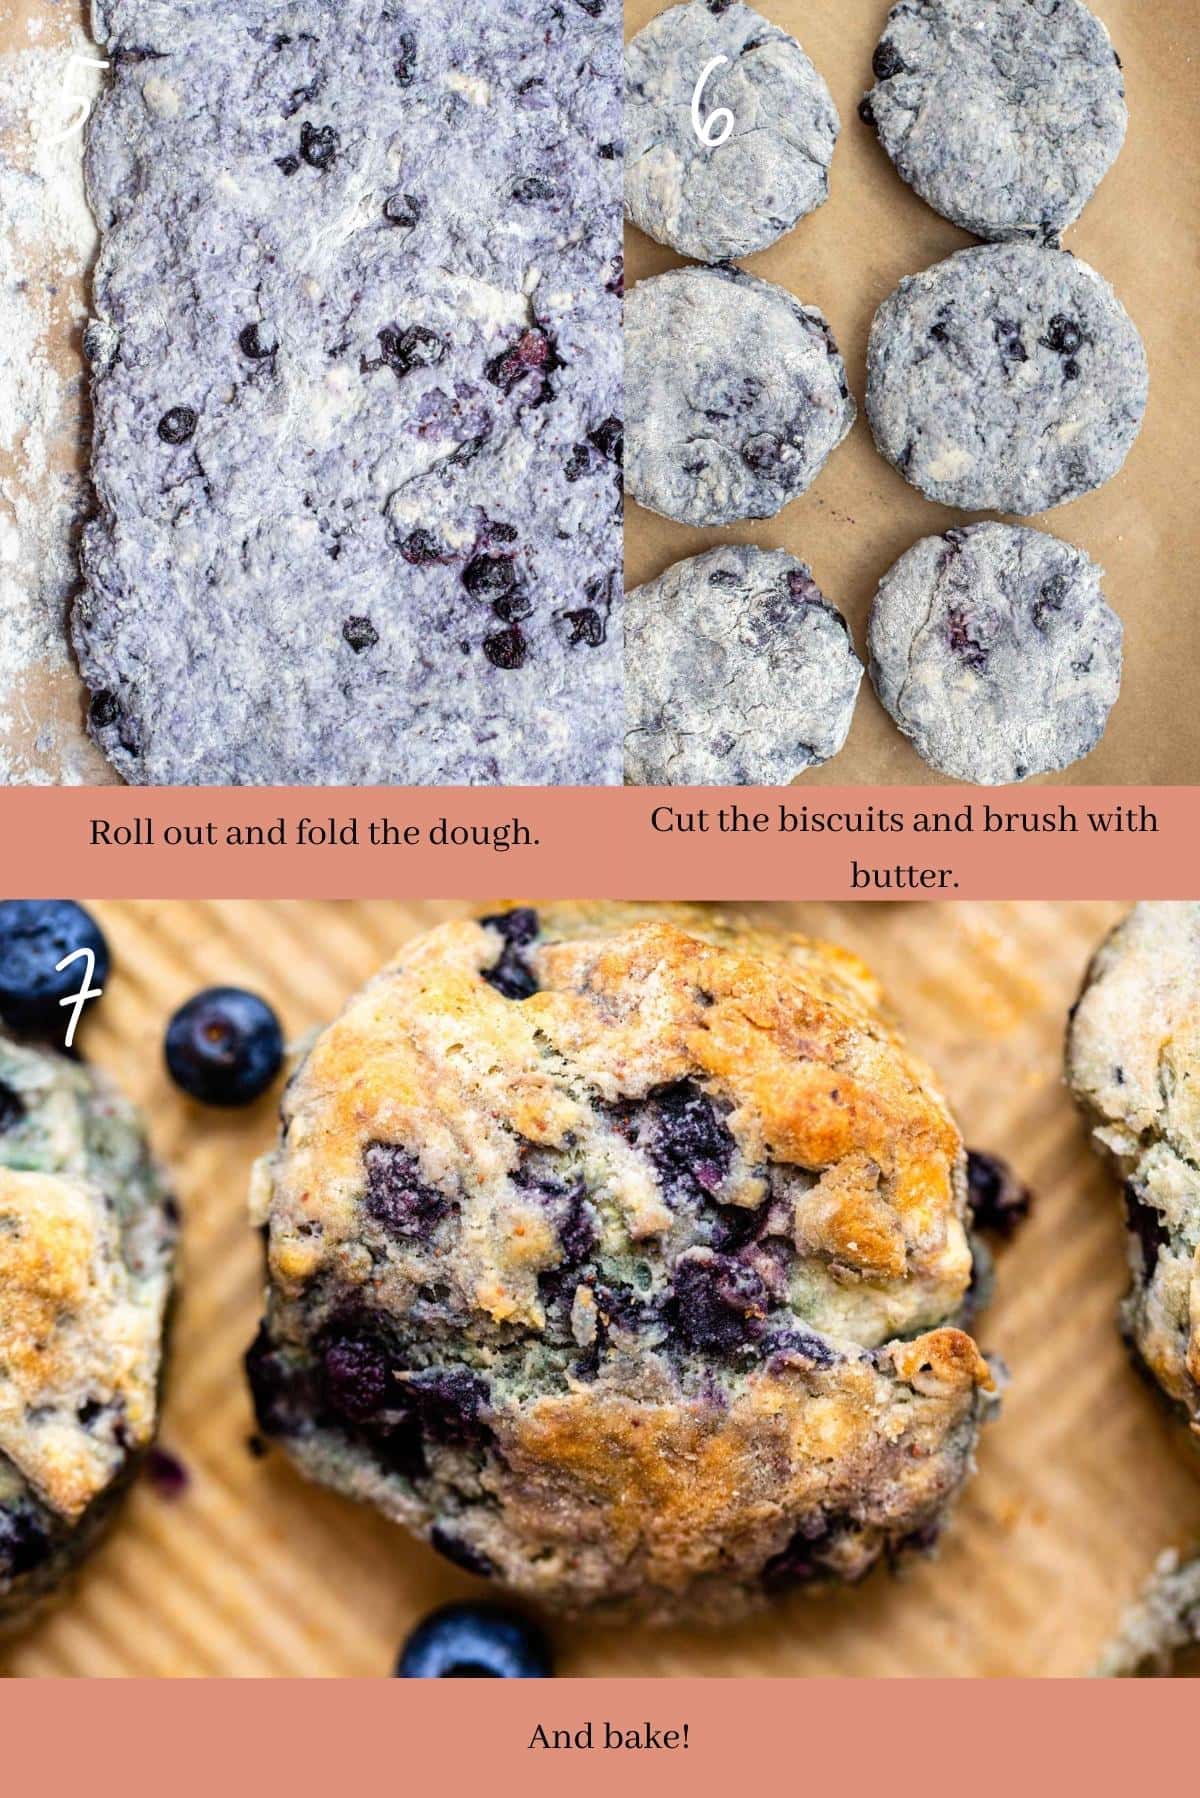 Collage showing how to make blueberry biscuits.